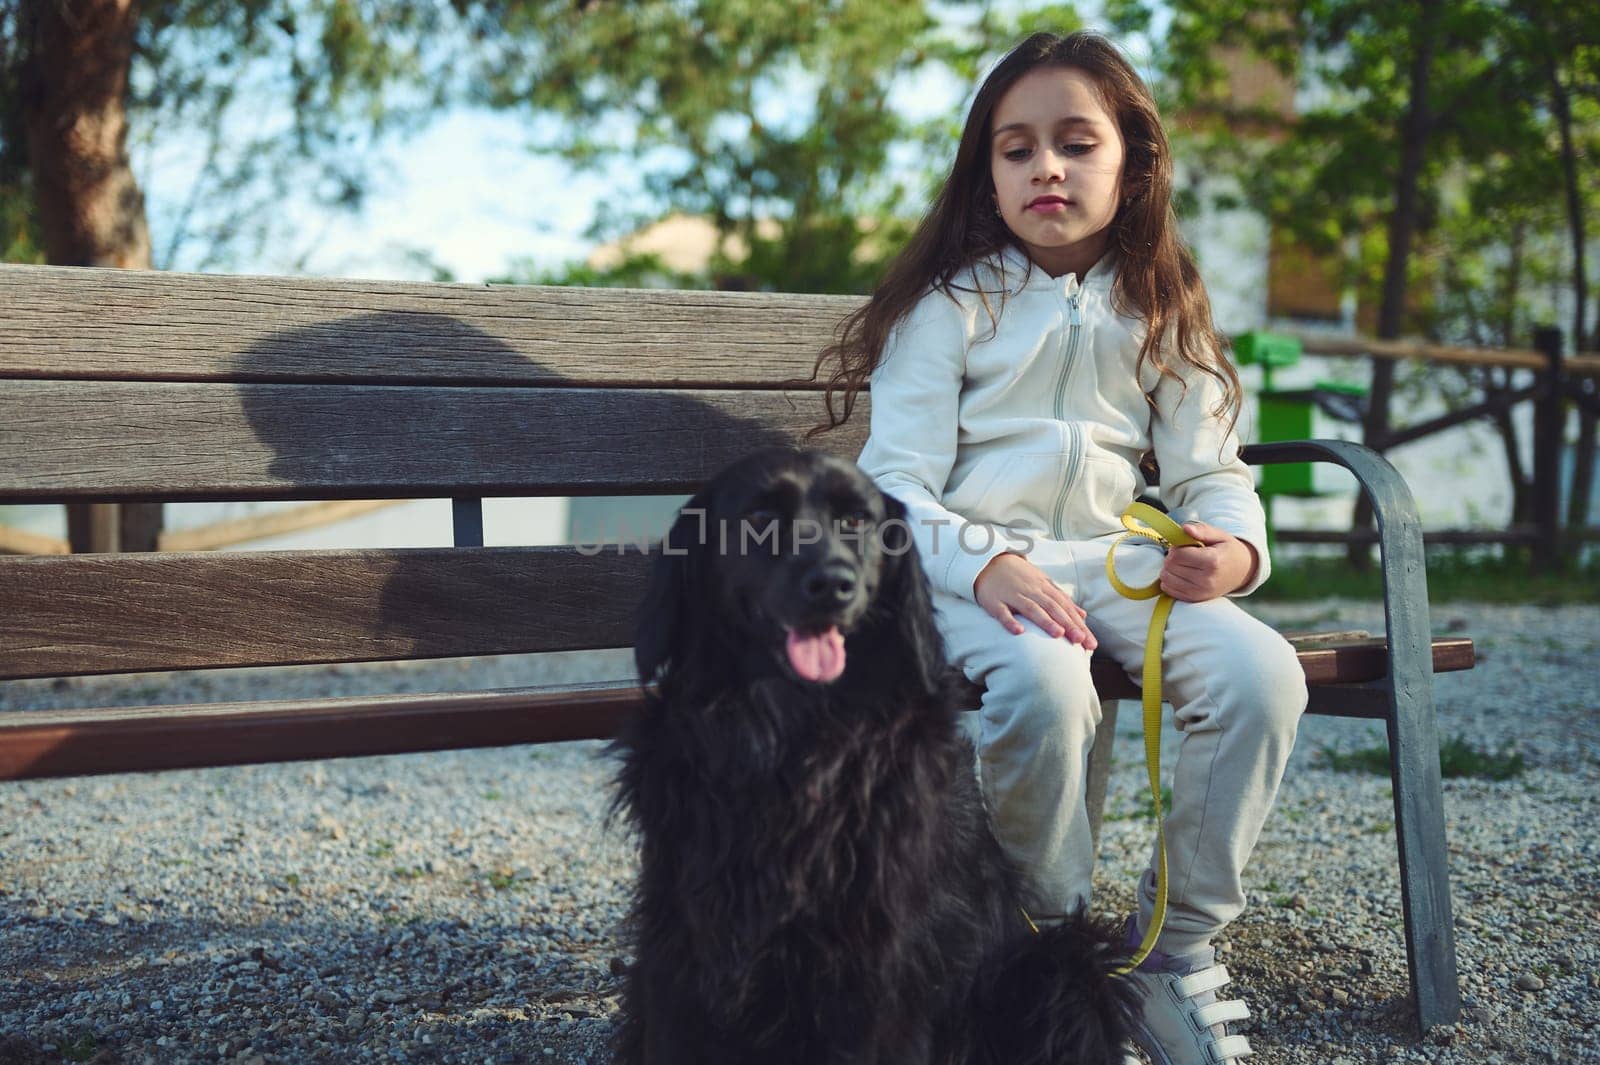 Adorable little girl sitting on a city bench, taking her pedigree cocker spaniel dog for a walk o the nature. Playing pets. People, childhood and dog as best companion by artgf